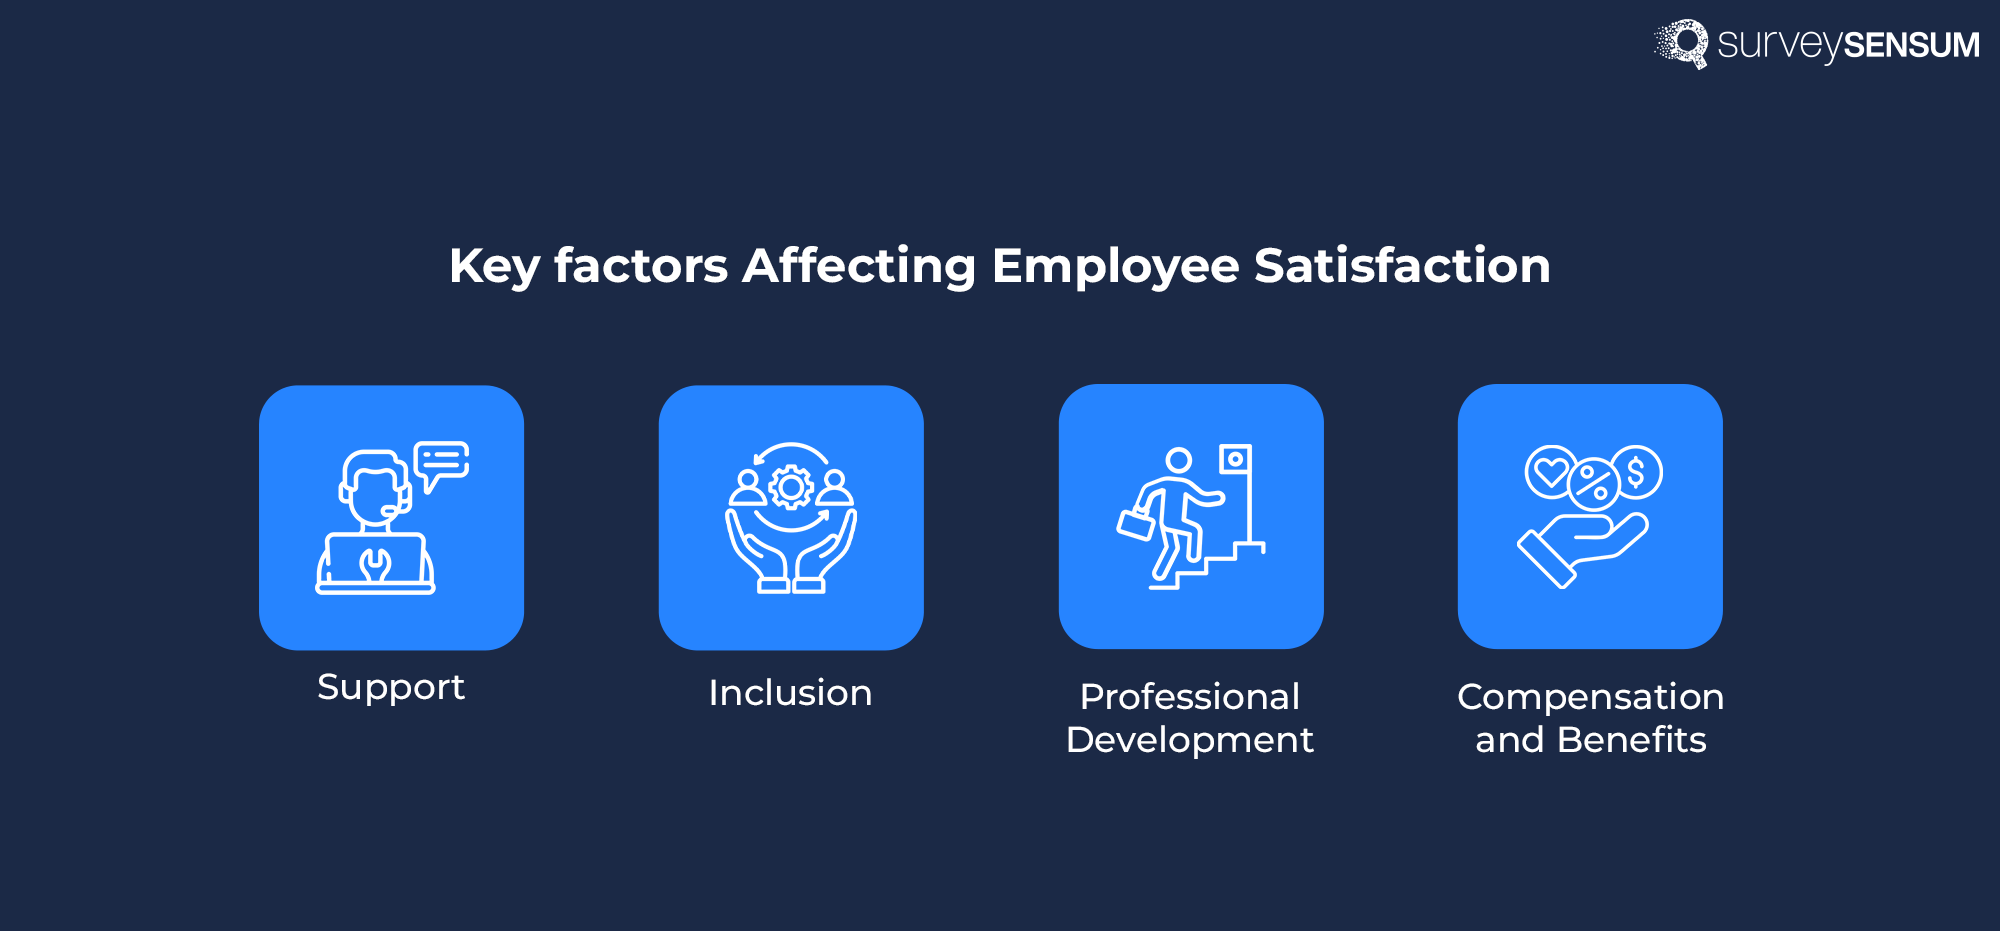 this is the image of key factors affecting employee satisfaction with 4 factors - support, inclusion, professional development, and benefits. 